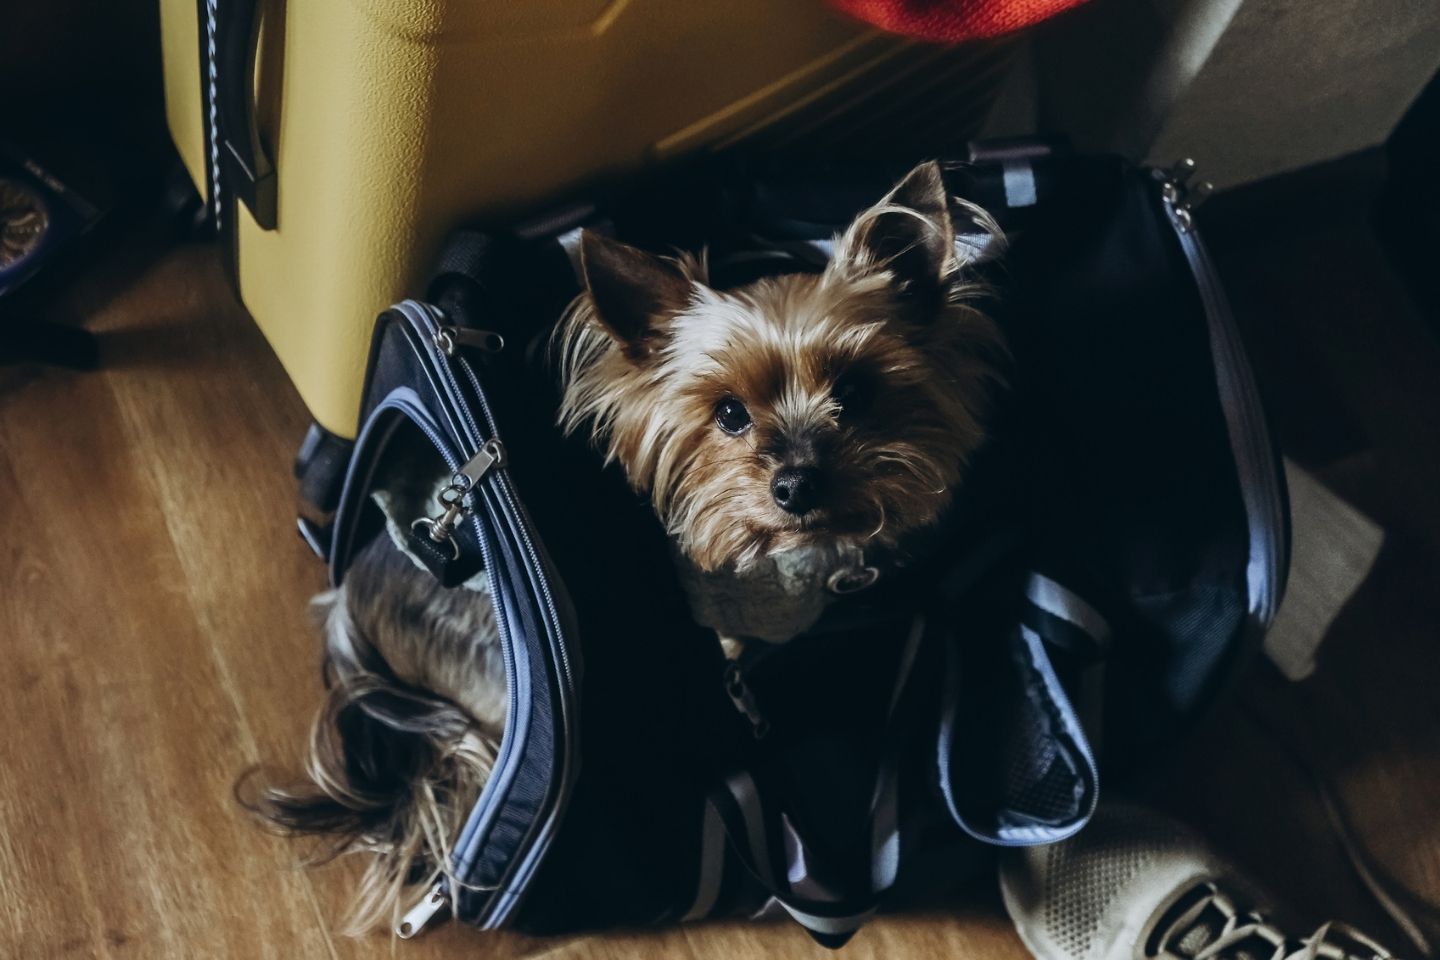 Pet Travel: Your Guide to Flying with Your Furry Friend